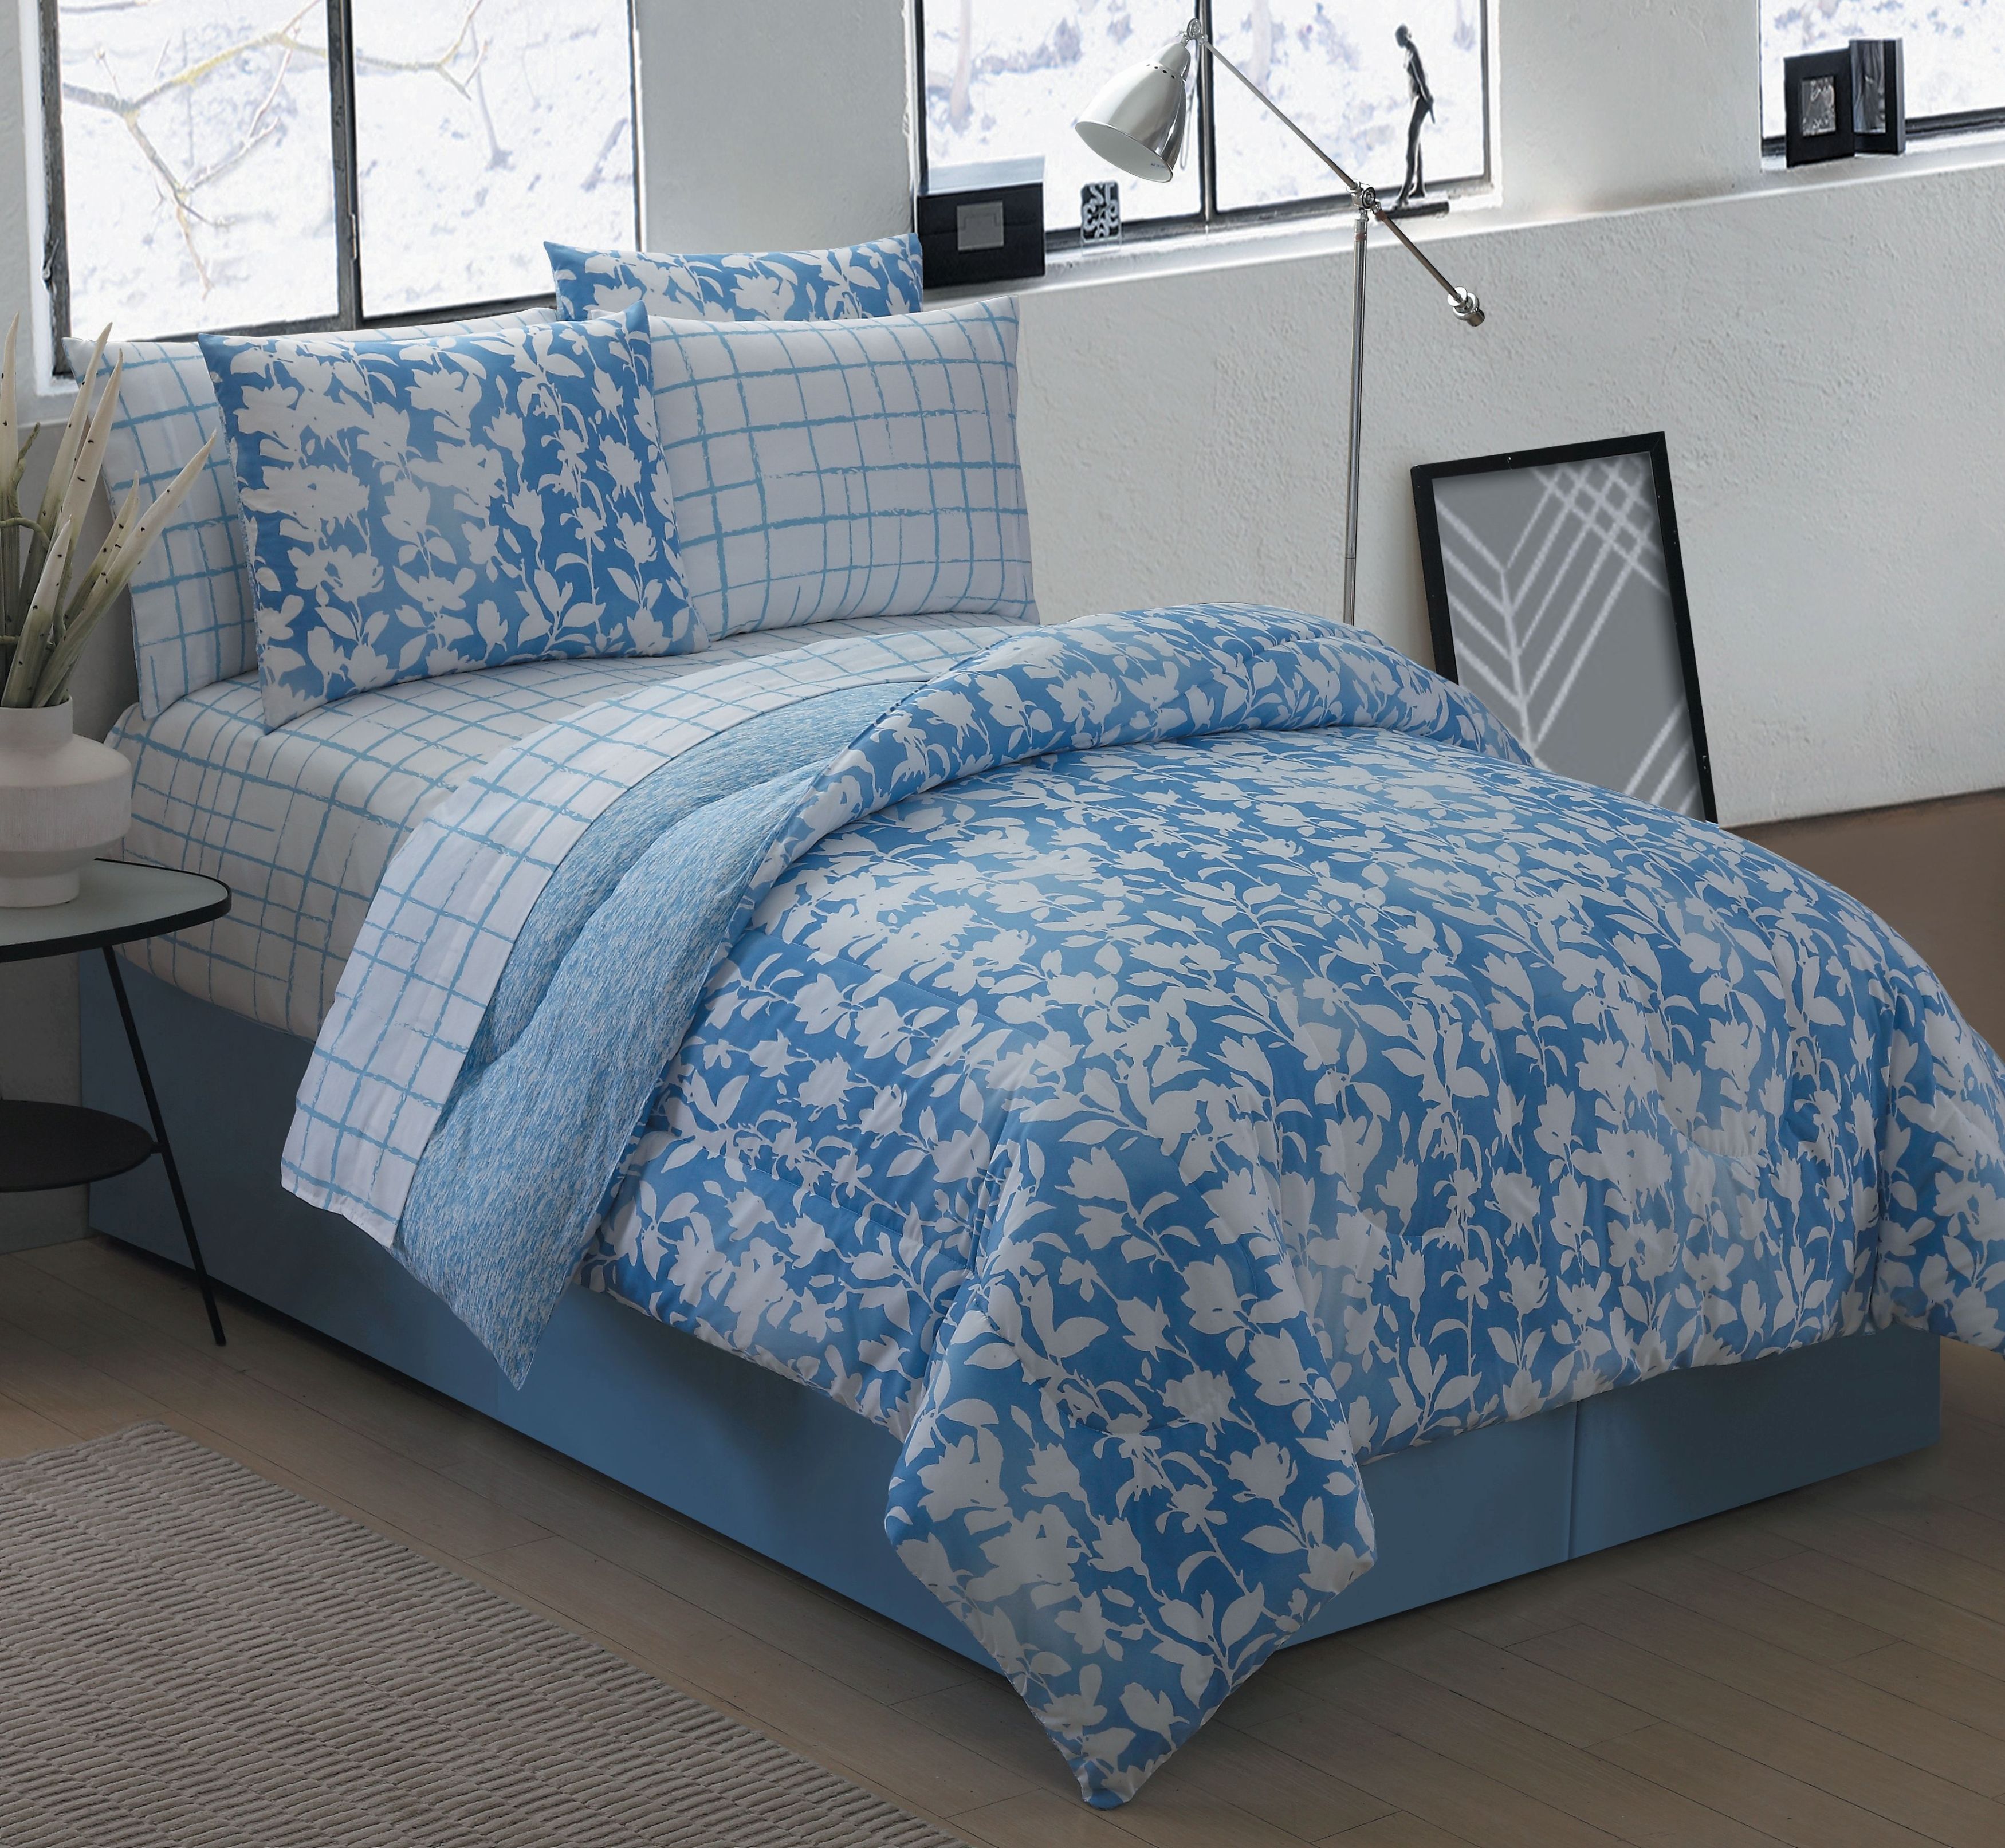 Avondale Manor  Edgewood 8-piece Bed in a Bag Set King BLUE